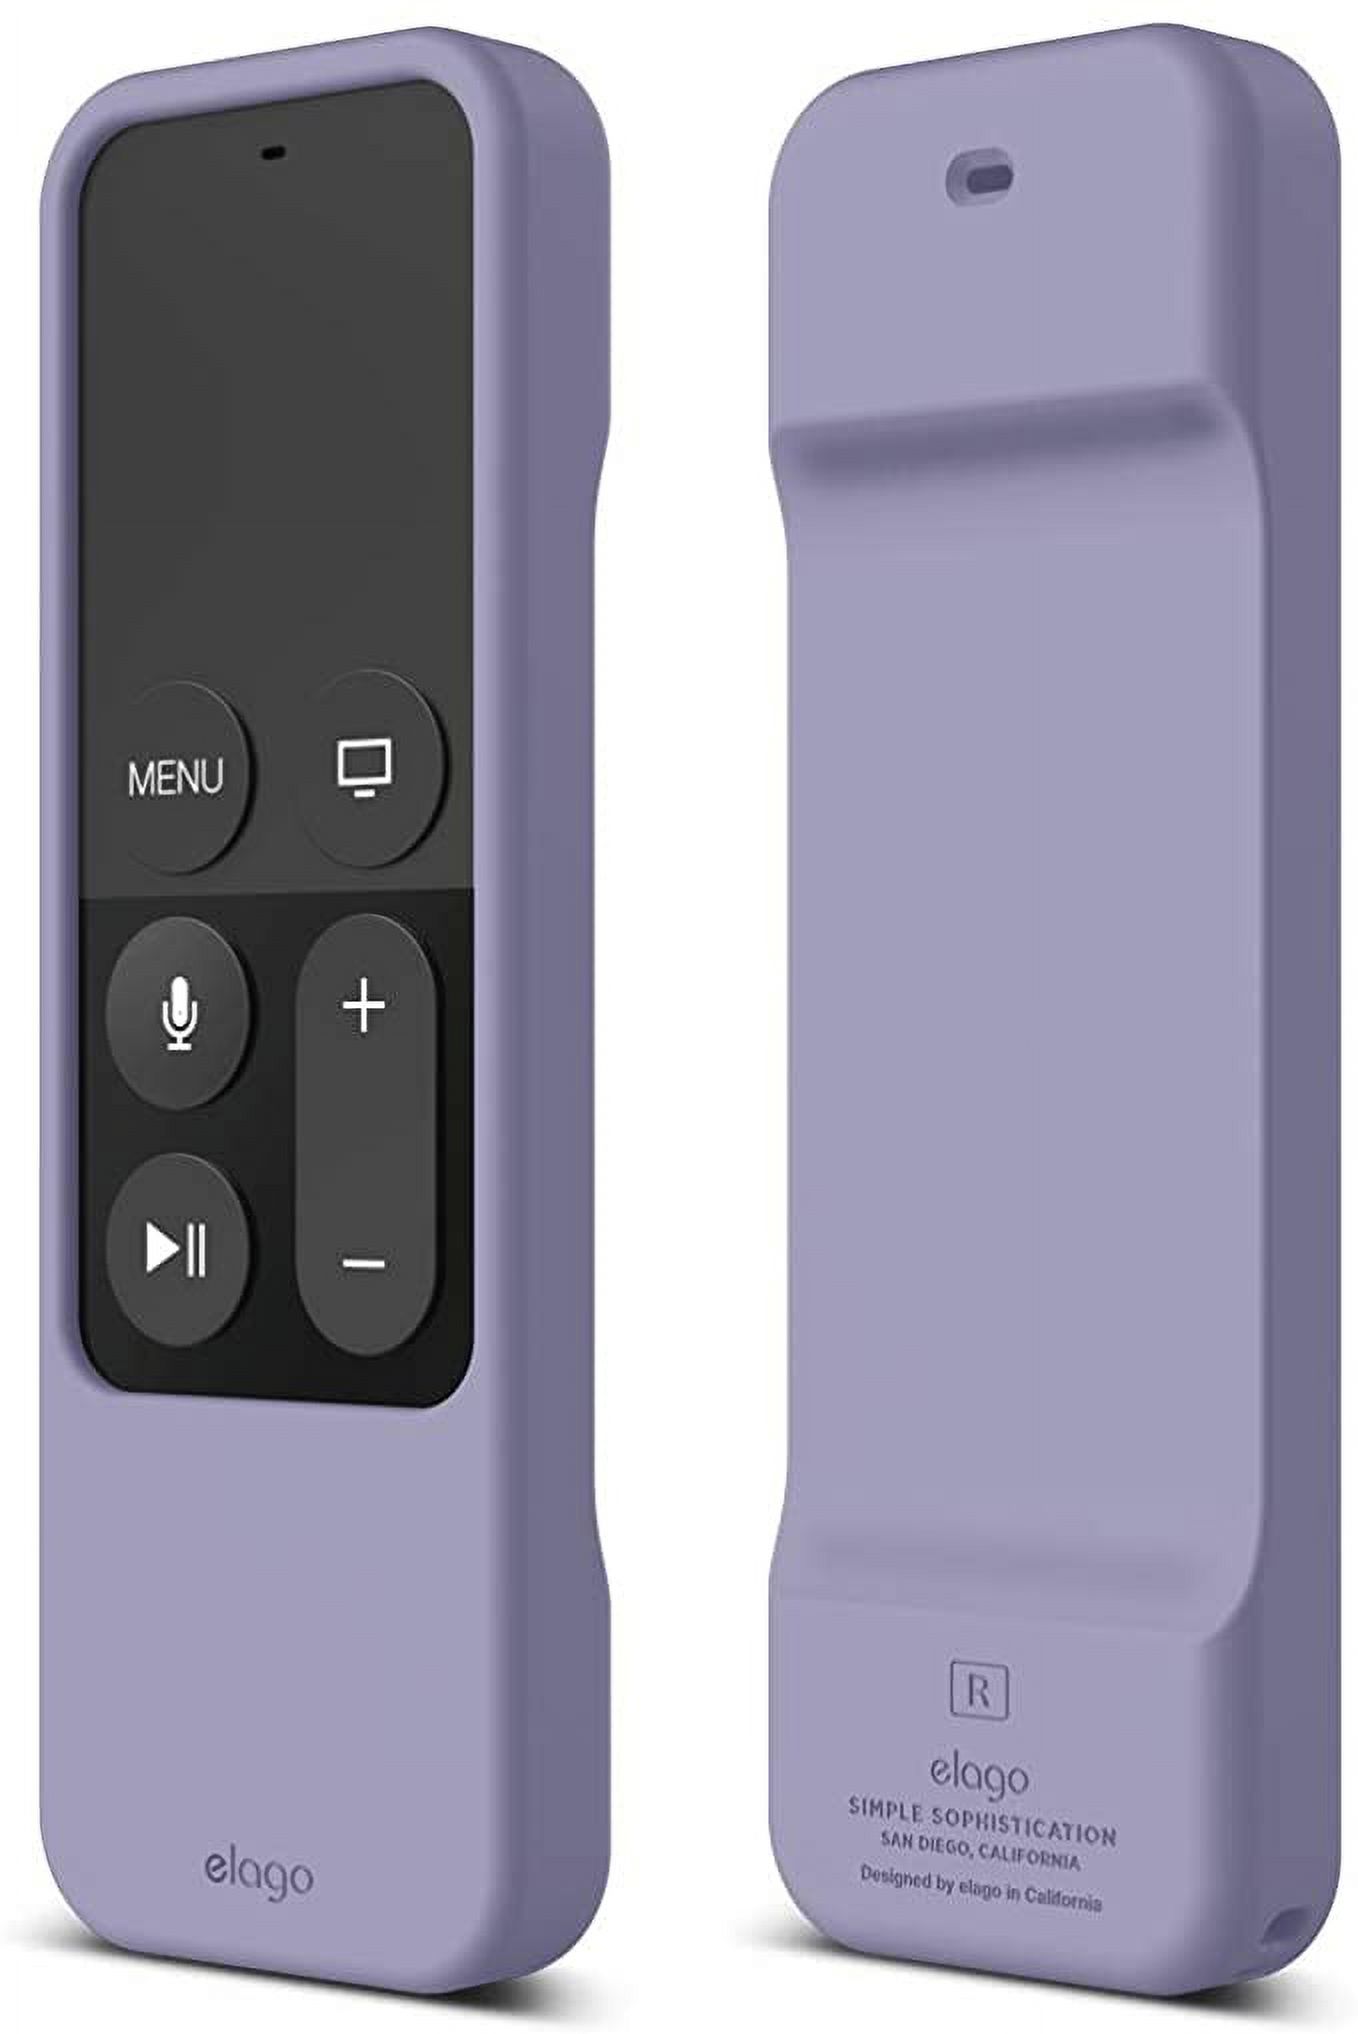 Apple Tv Remote Case Cover - elago R1 Intelli Case for Apple TV Siri Remote 4K / 4th Generation (Lavender Grey) – Magnet Technology, Shock Absorption, Lanyard Included, Apple Tv 4k Remote Case - image 1 of 7